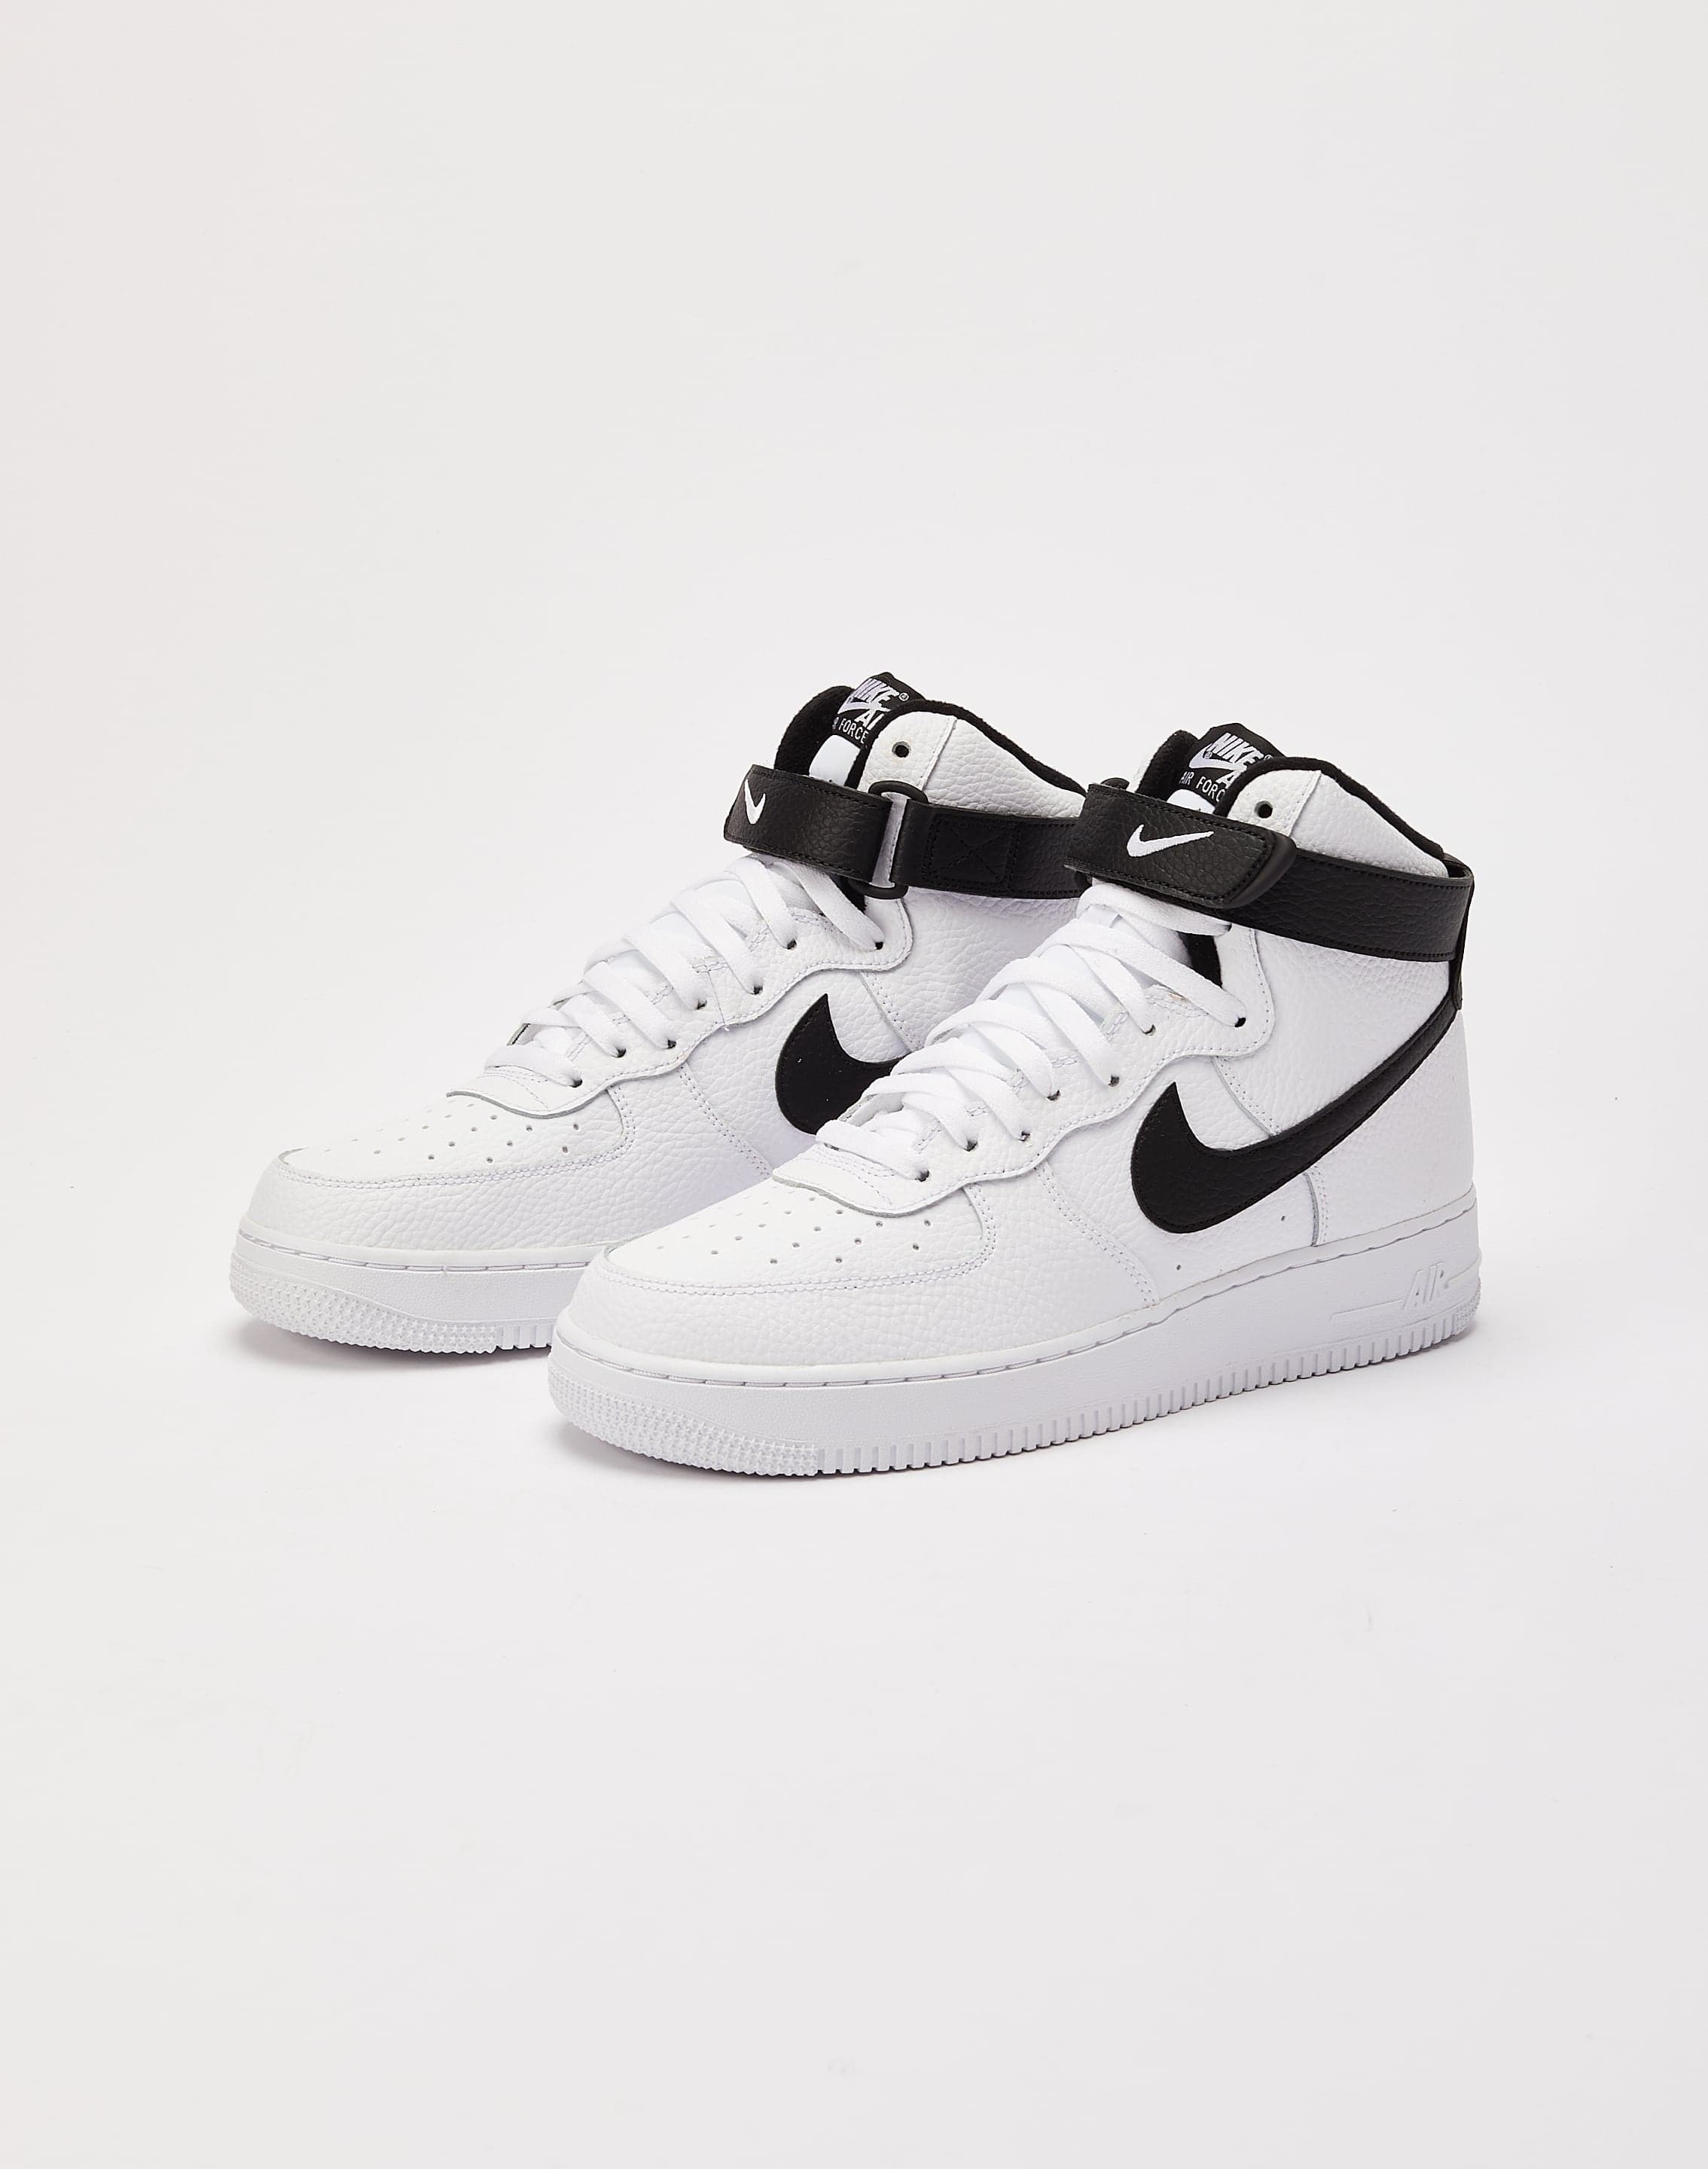 Nike Air Force 1 '07 High Sneakers in Black and White